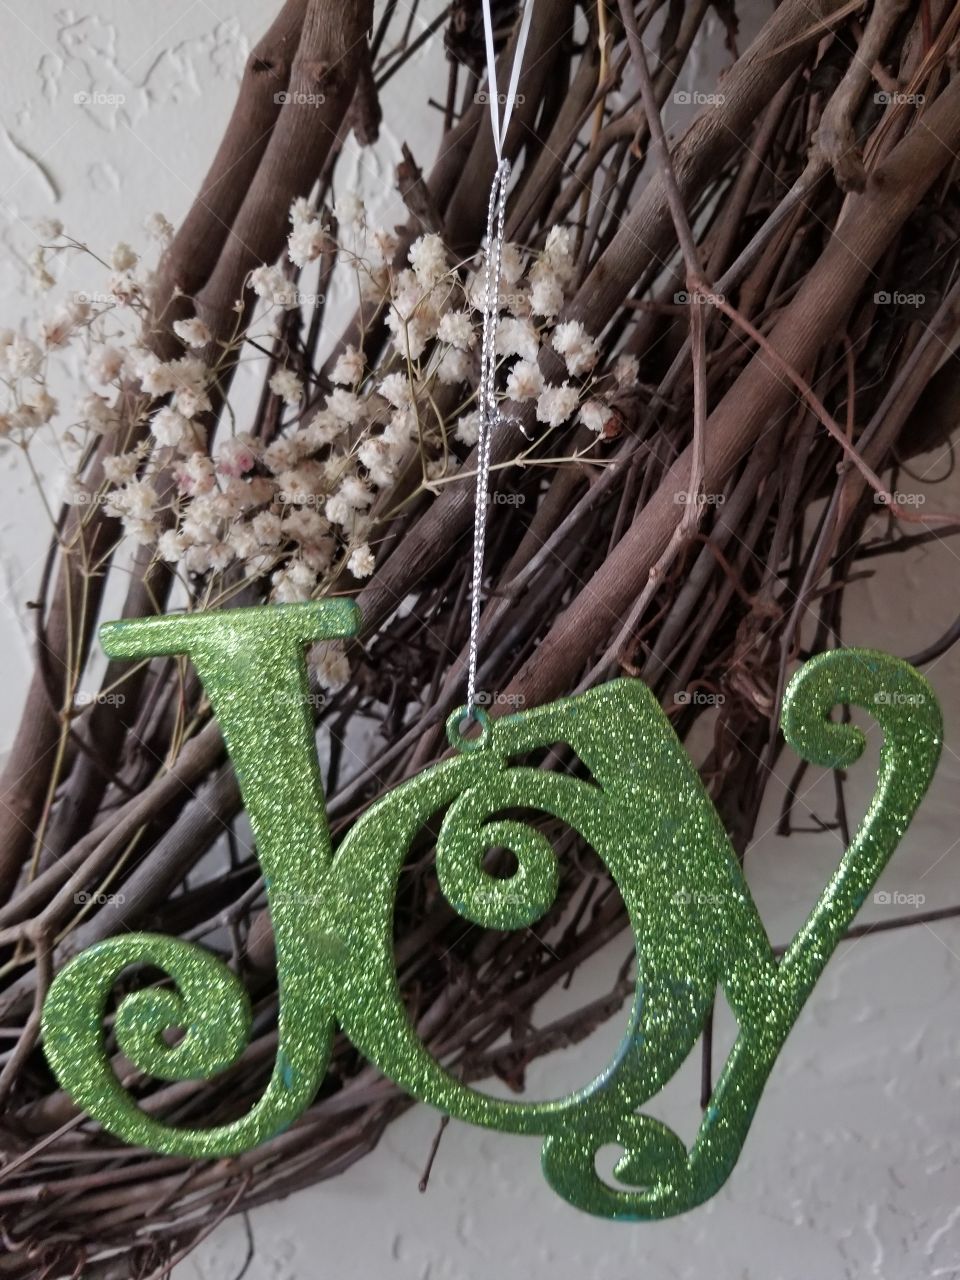 word "joy" in green glitter hangs in front of an intertwined twig wreath adorned with baby breath flowers